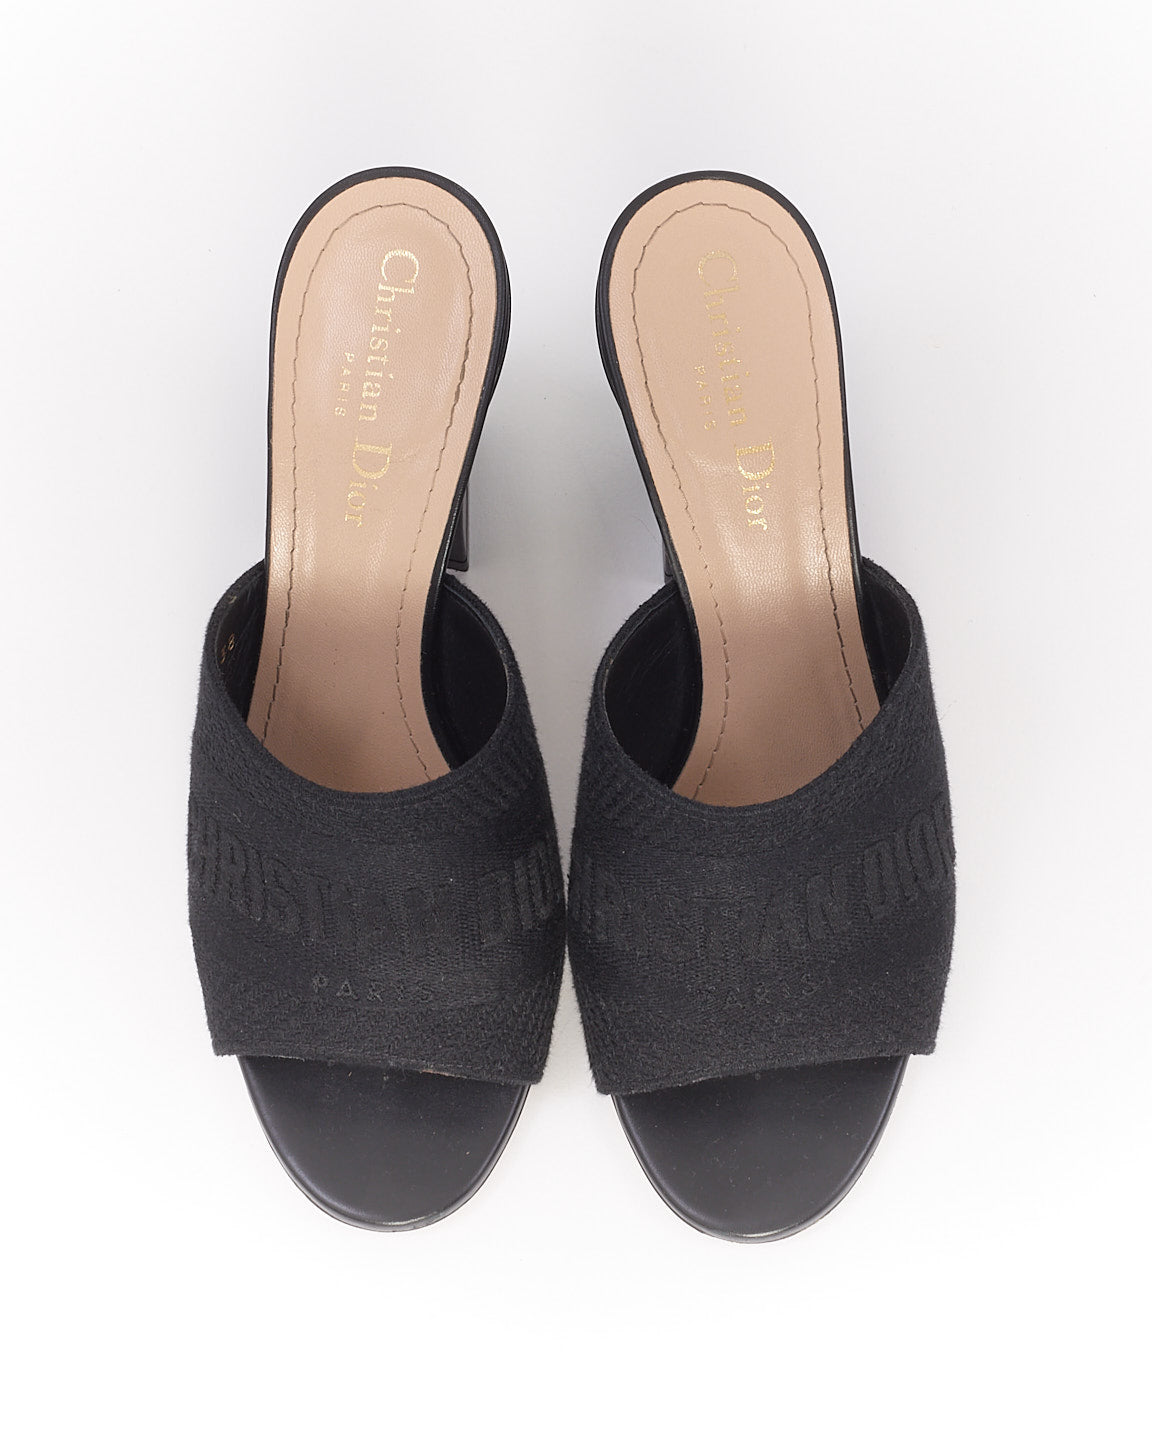 Dior Black Canvas Embroidered Dway Mule Heeled Sandals - 38